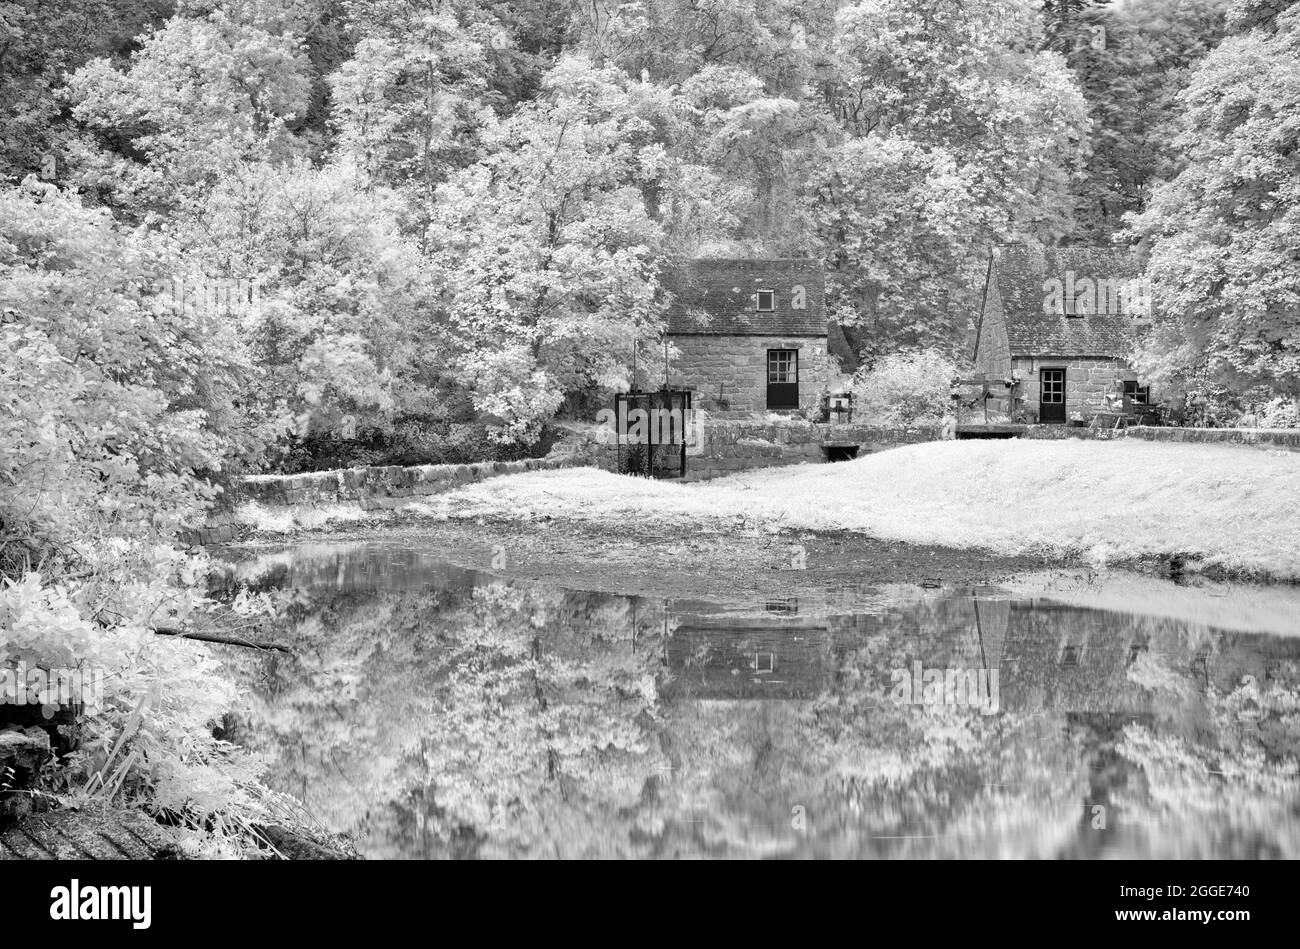 Infrared image, mill, moulin, Milin Traou Morvan, Vallee du Le Leguer, river of migratory fish, Tonquedec, Cotes-d'Armor, Brittany, France Stock Photo